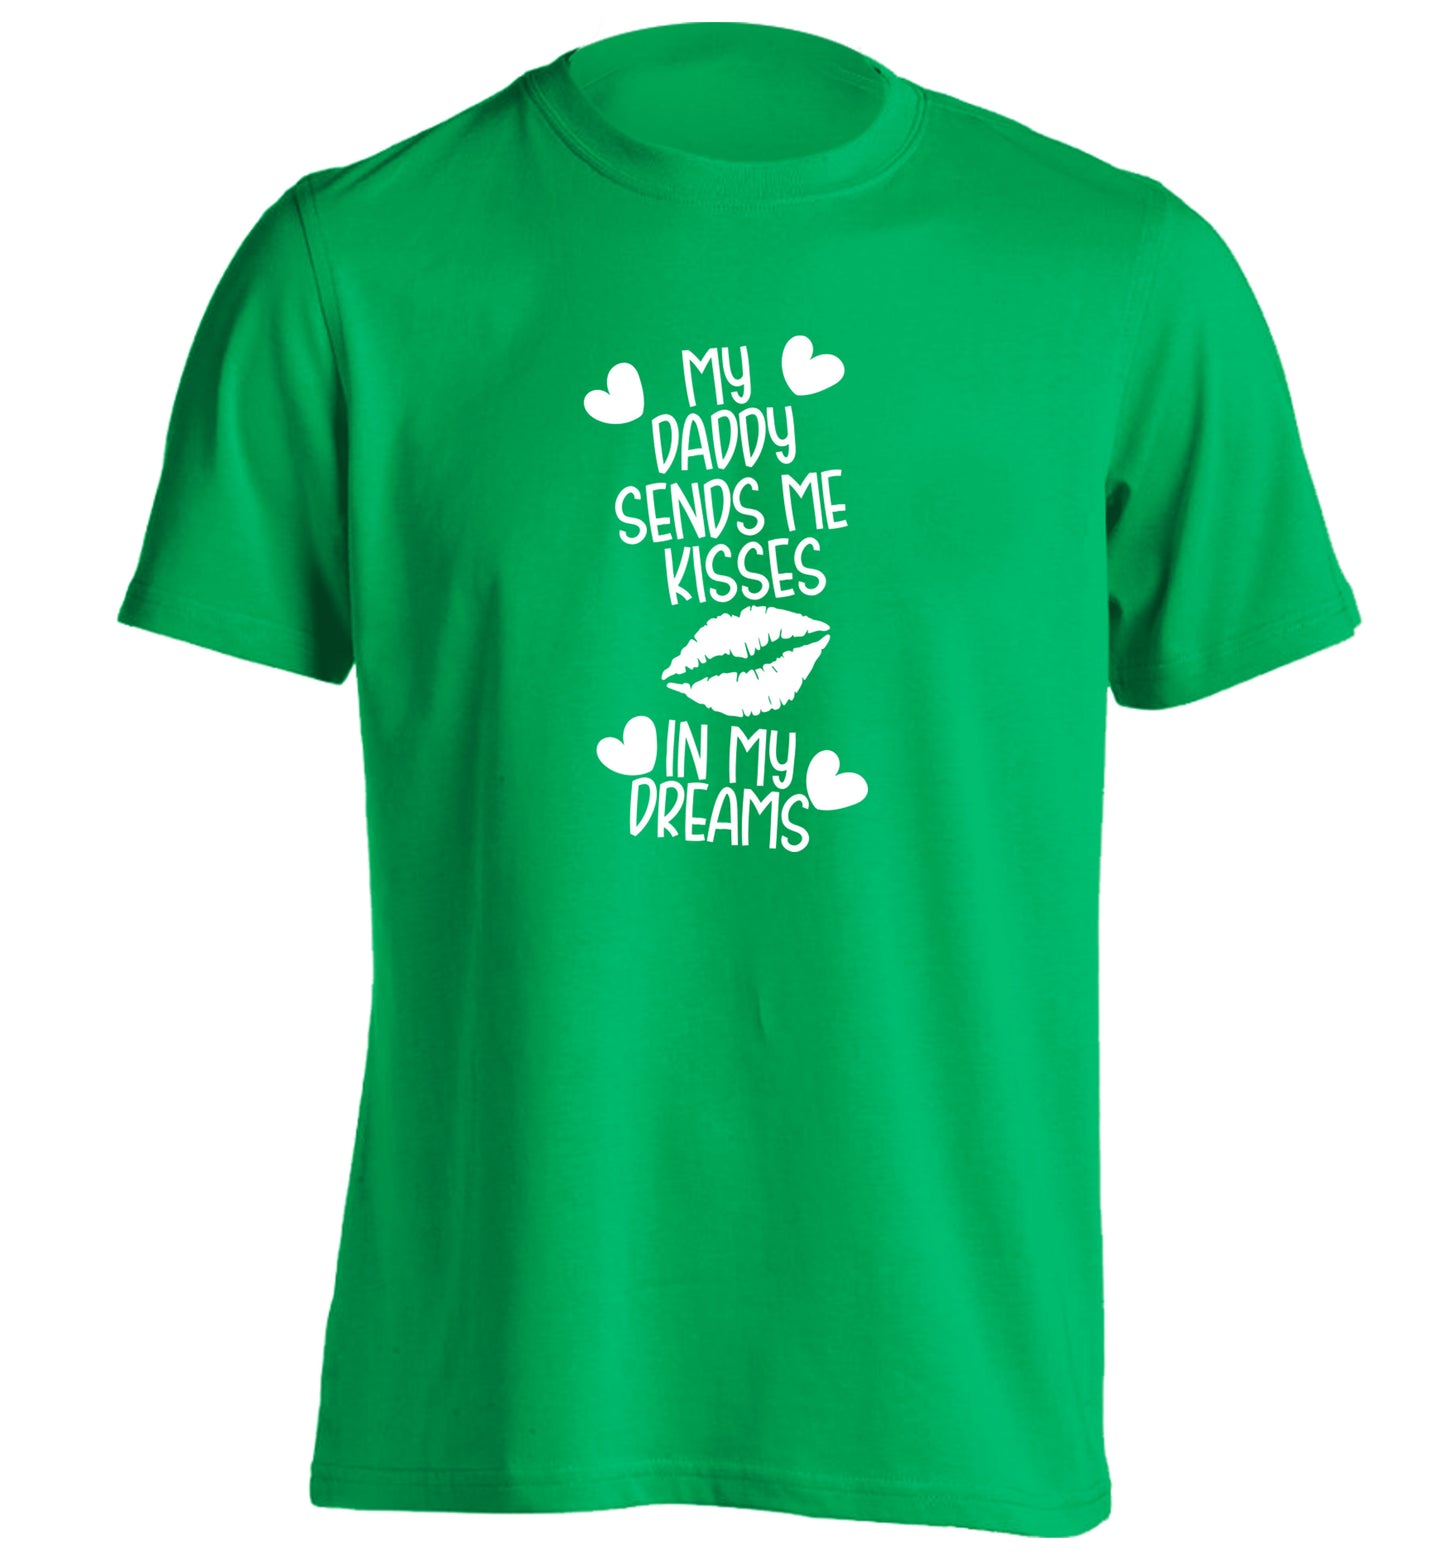 My daddy sends me kisses in my dreams adults unisex green Tshirt 2XL